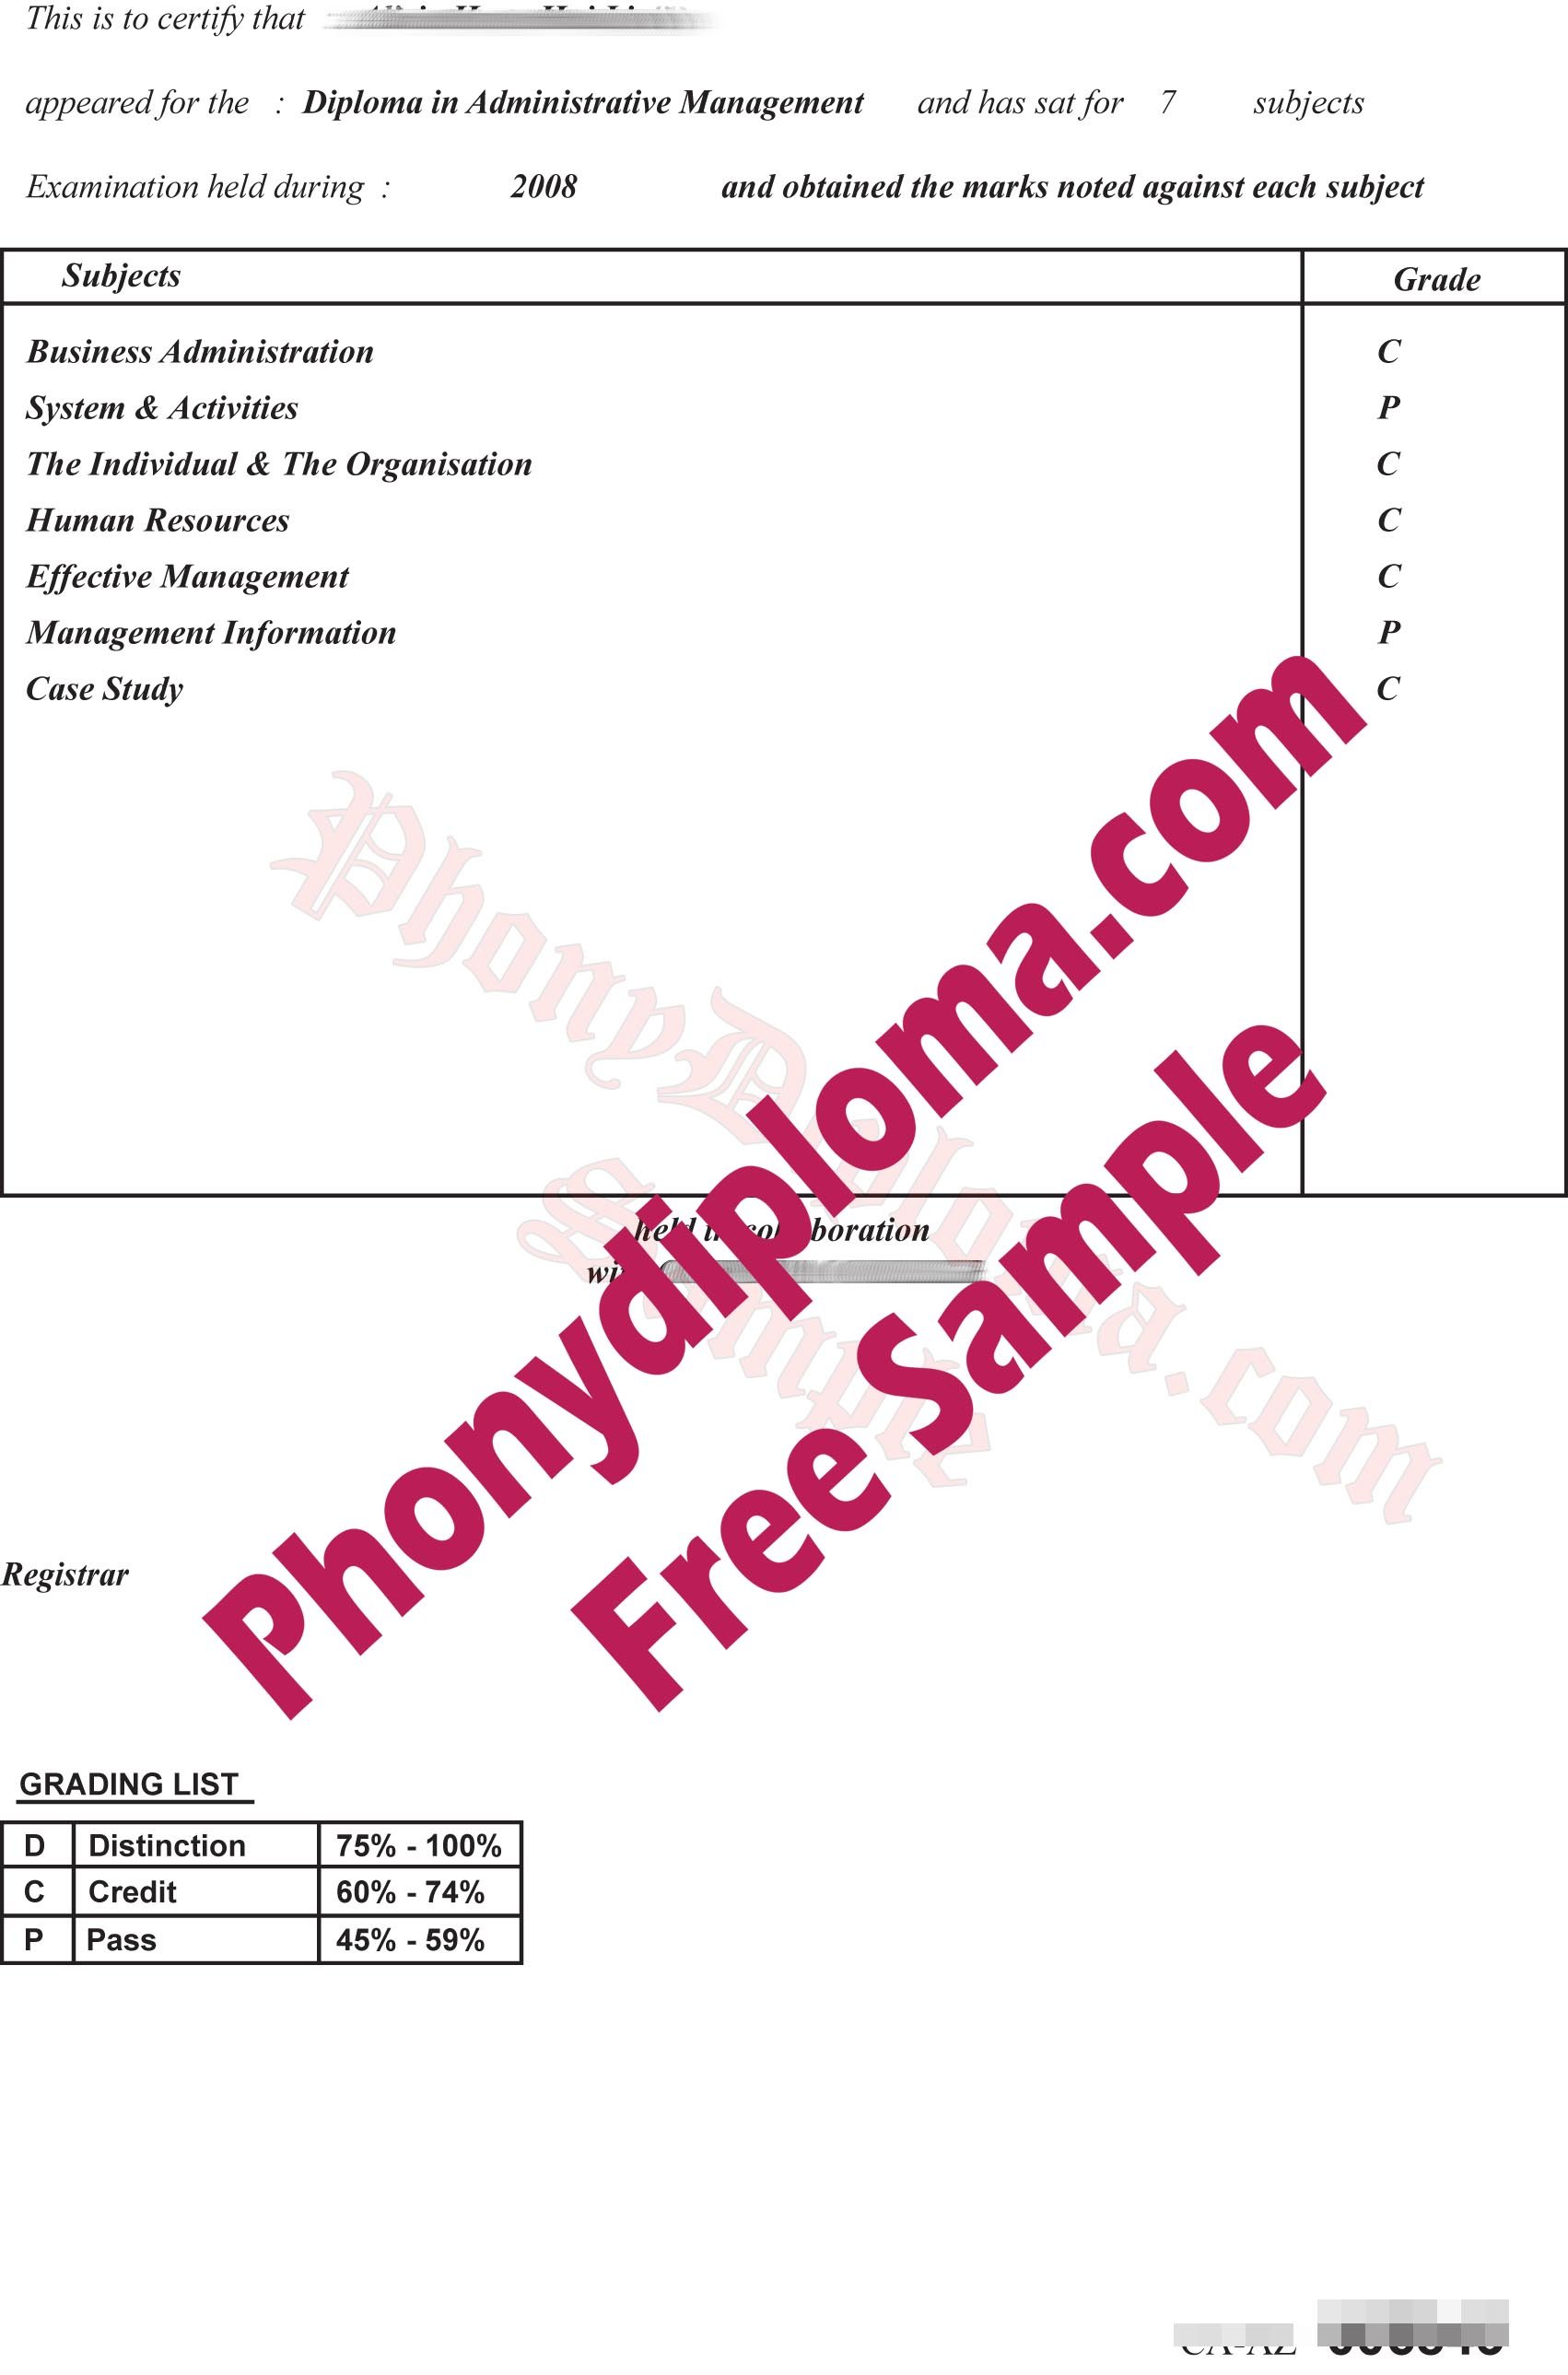 Raffles Education Group Actual Match Transcript Free Sampple From Phonydiploma